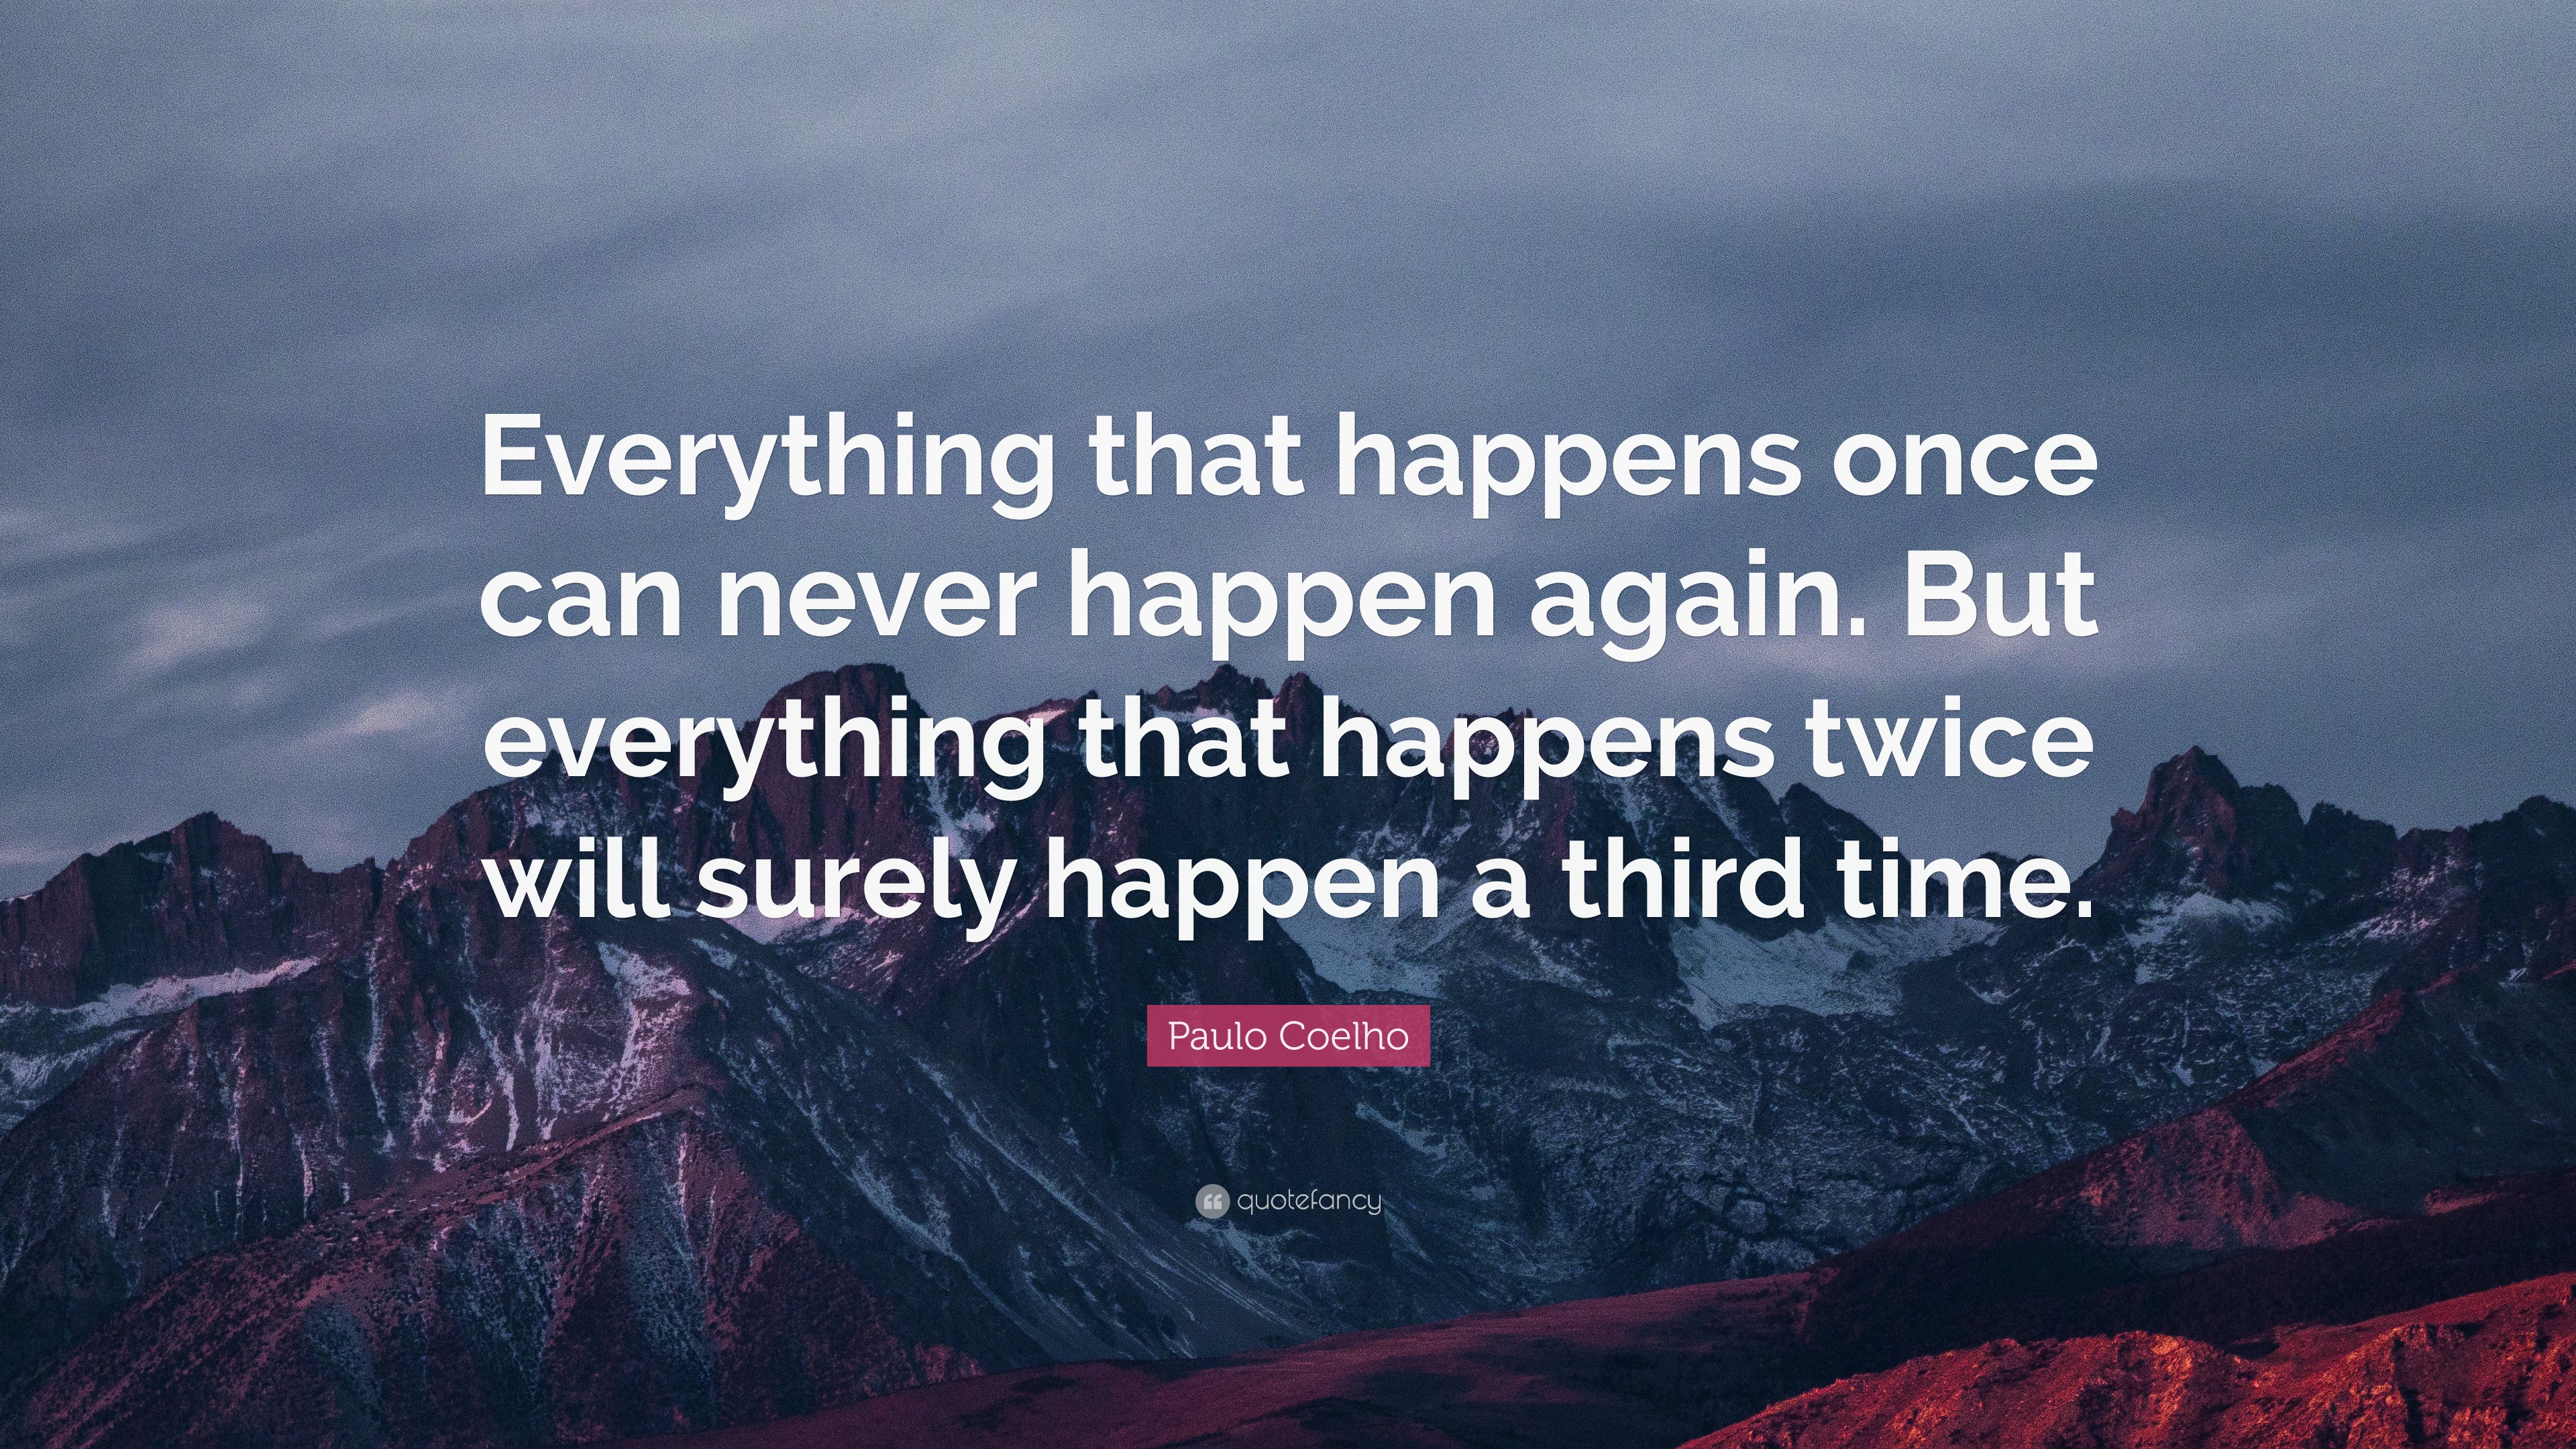 Paulo Coelho quote: If something happens once, it may never happen again. If